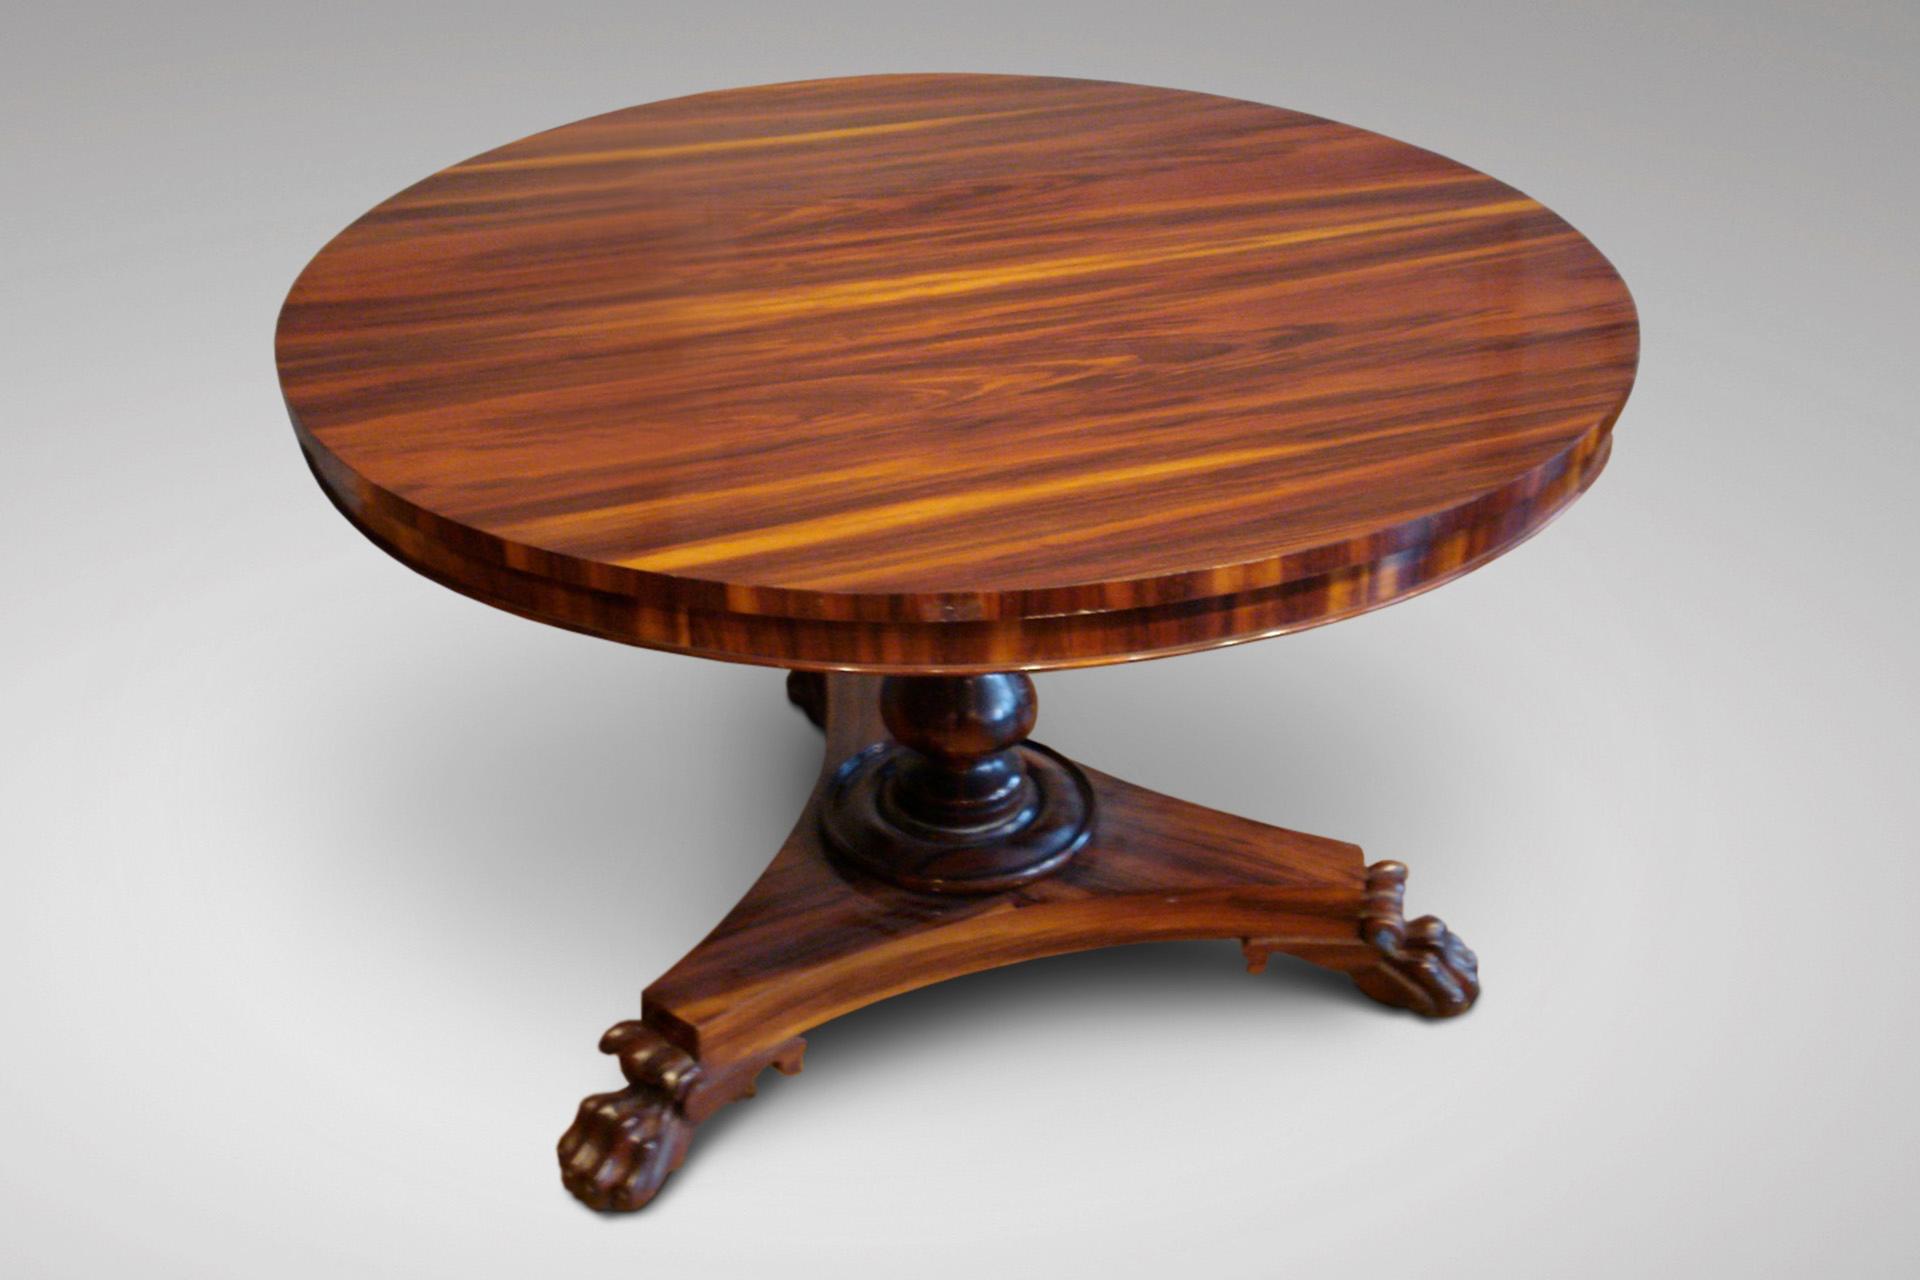 An unusual 19th century centre table in Goncalo Alves, sort of rosewood with a circular tilt-top, turned baluster stem and a concave sided trefoil platform raised on scroll carved claw feet with concealed castors. England circa 1830. Superb quality.